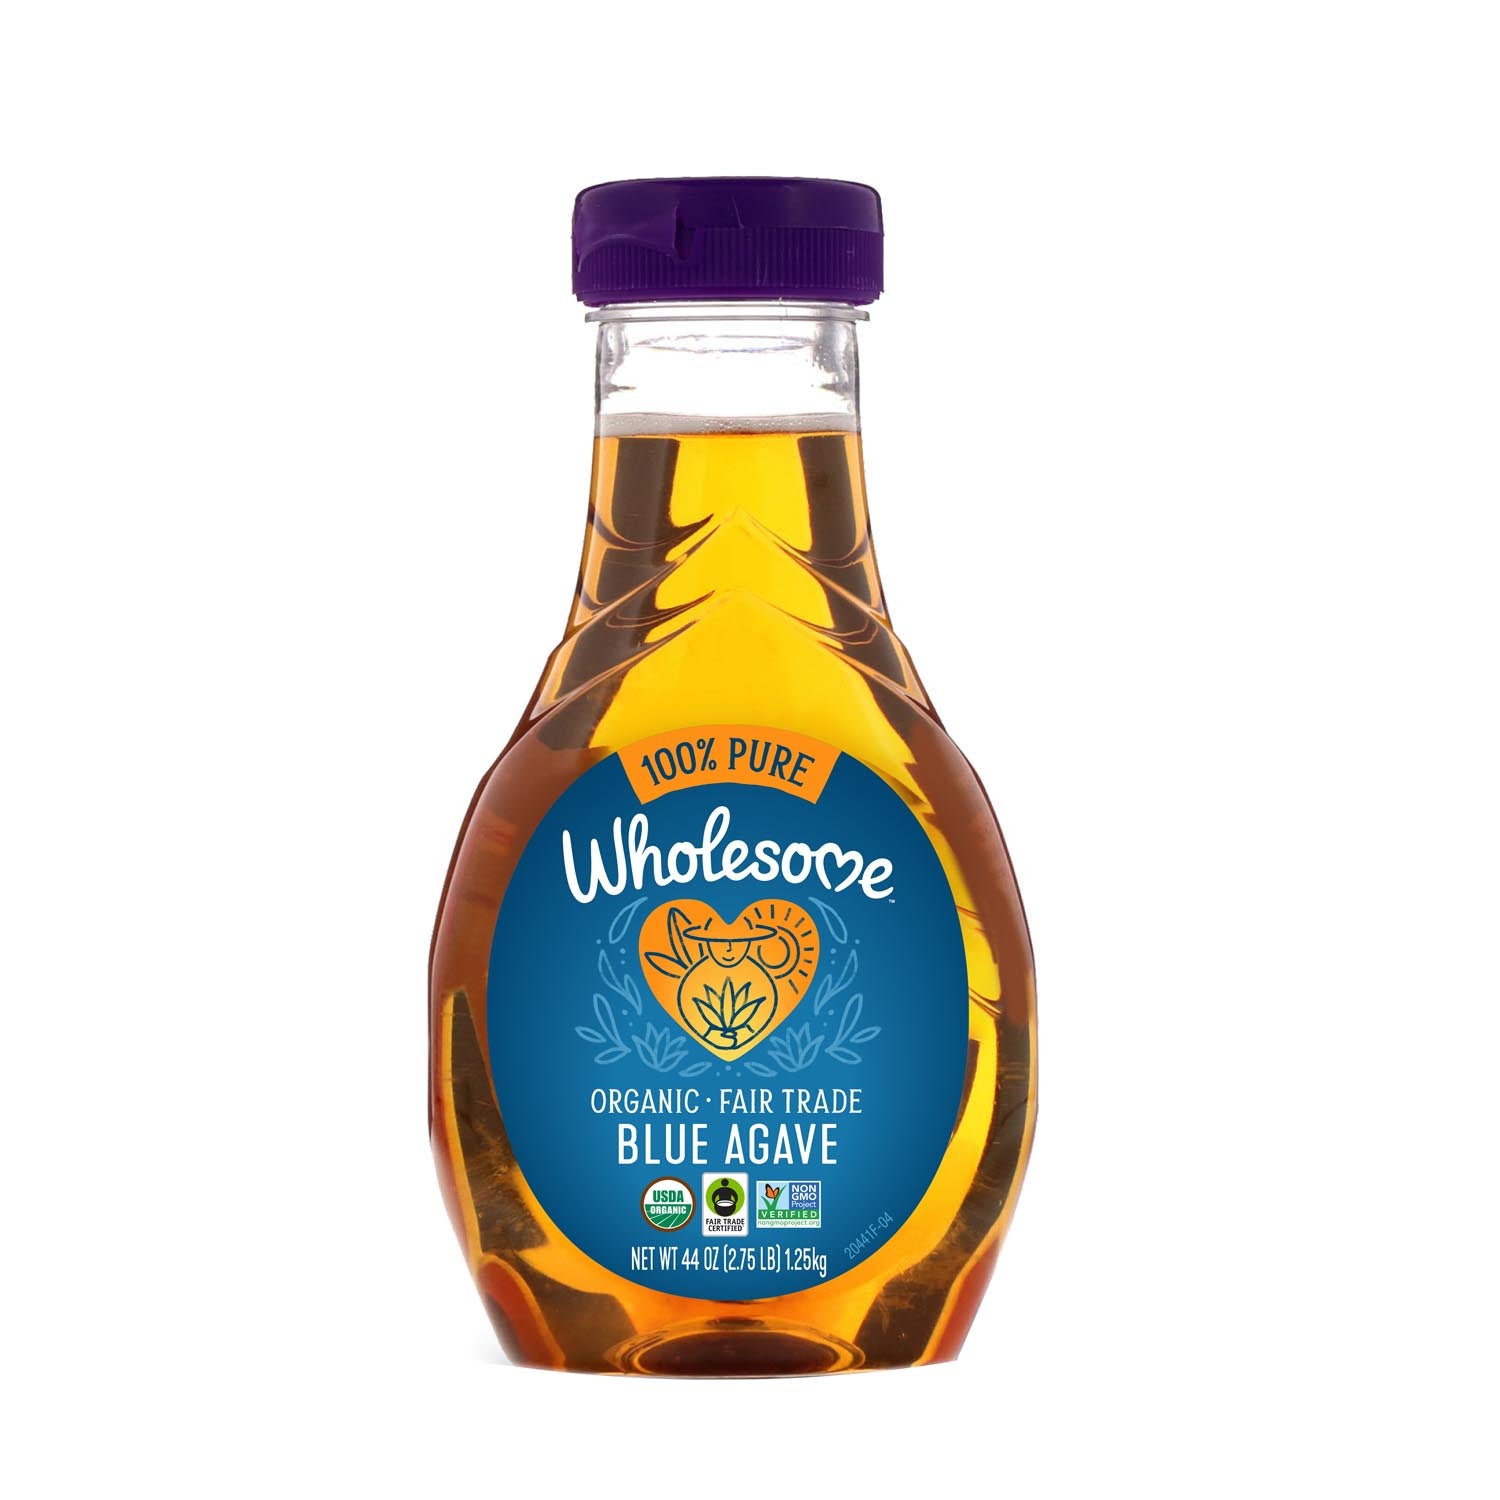 Wholesome Organic Fair Trade Blue Agave - 6ct/44oz Bottle